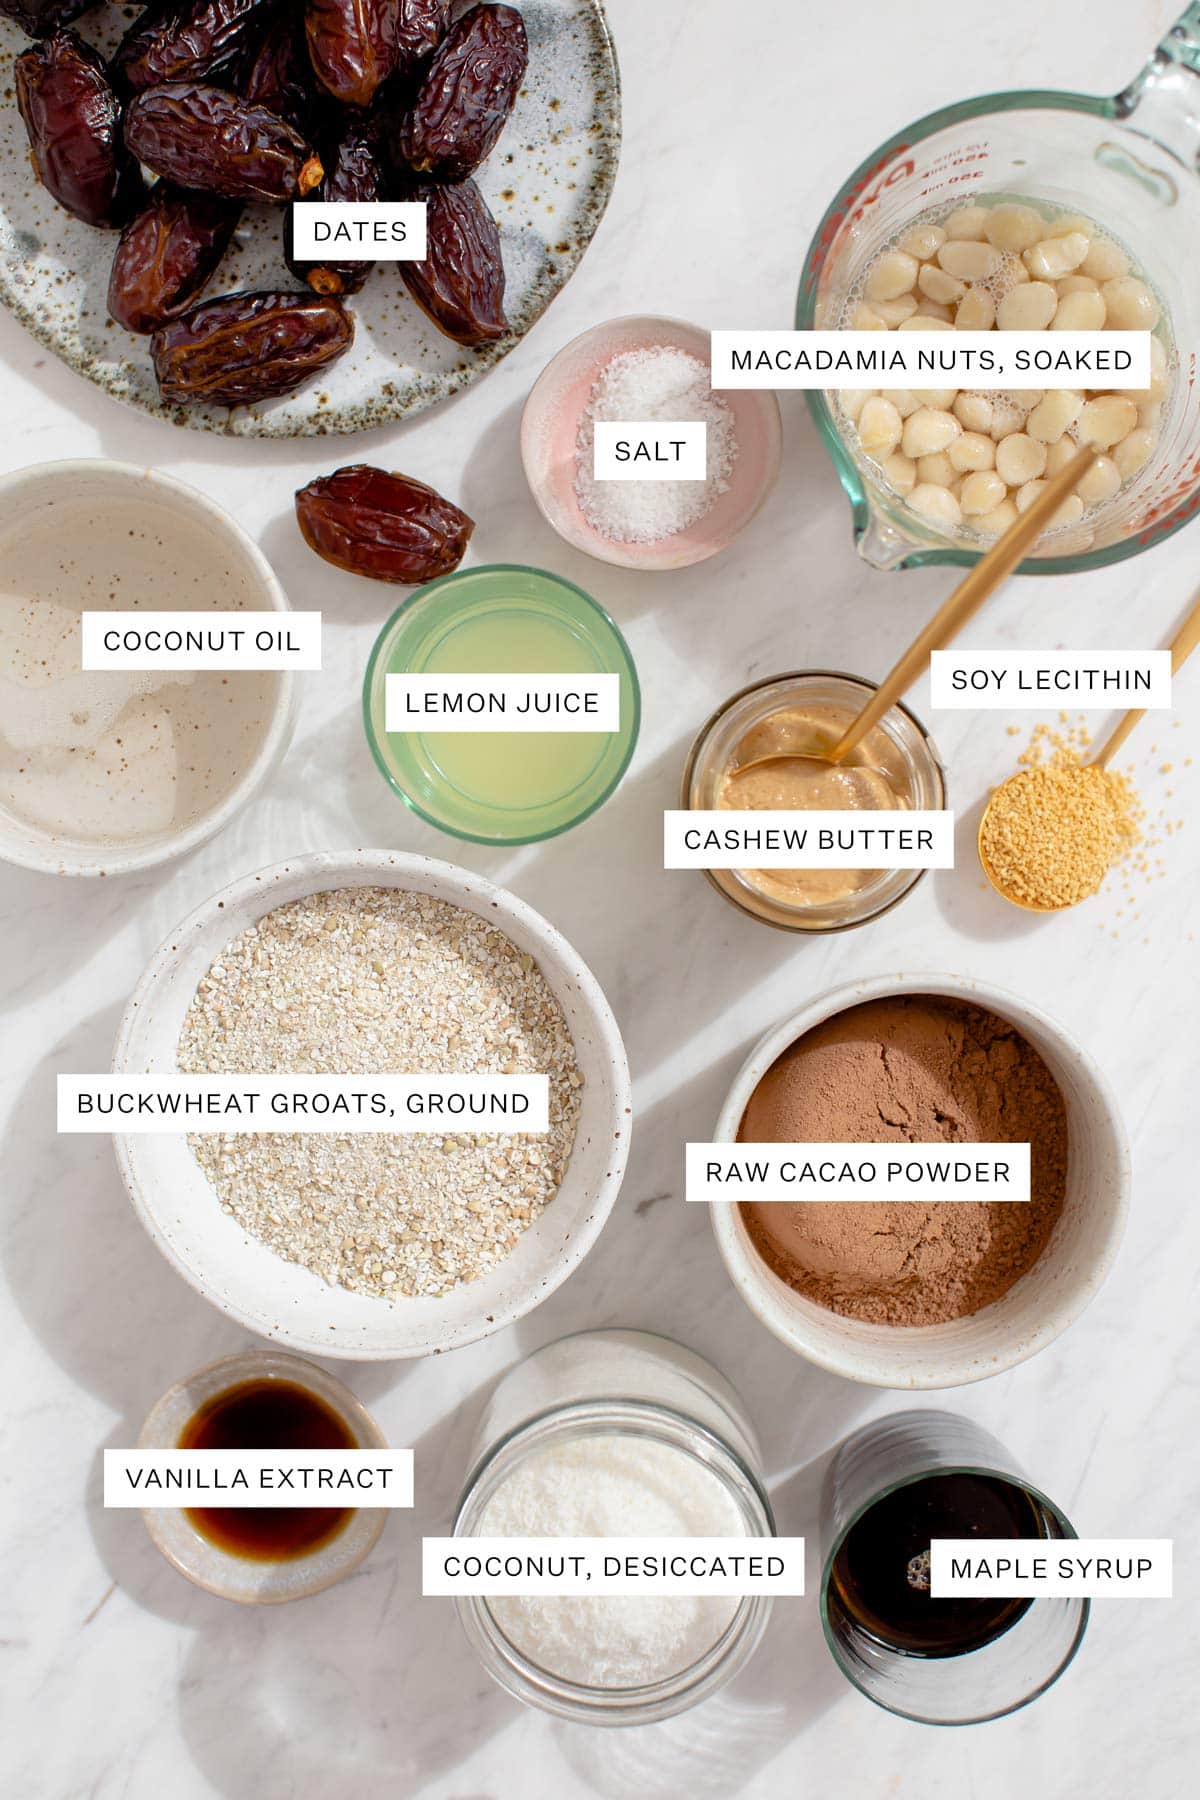 Flat lay of all the ingredients needed to make this recipe: buckwheat, desiccated coconut, coconut oil, vanilla, maple syrup, cacao powder, lemon juice, soy lecithin granules, cashew butter, macadamia nuts, Medjool dates and sea salt